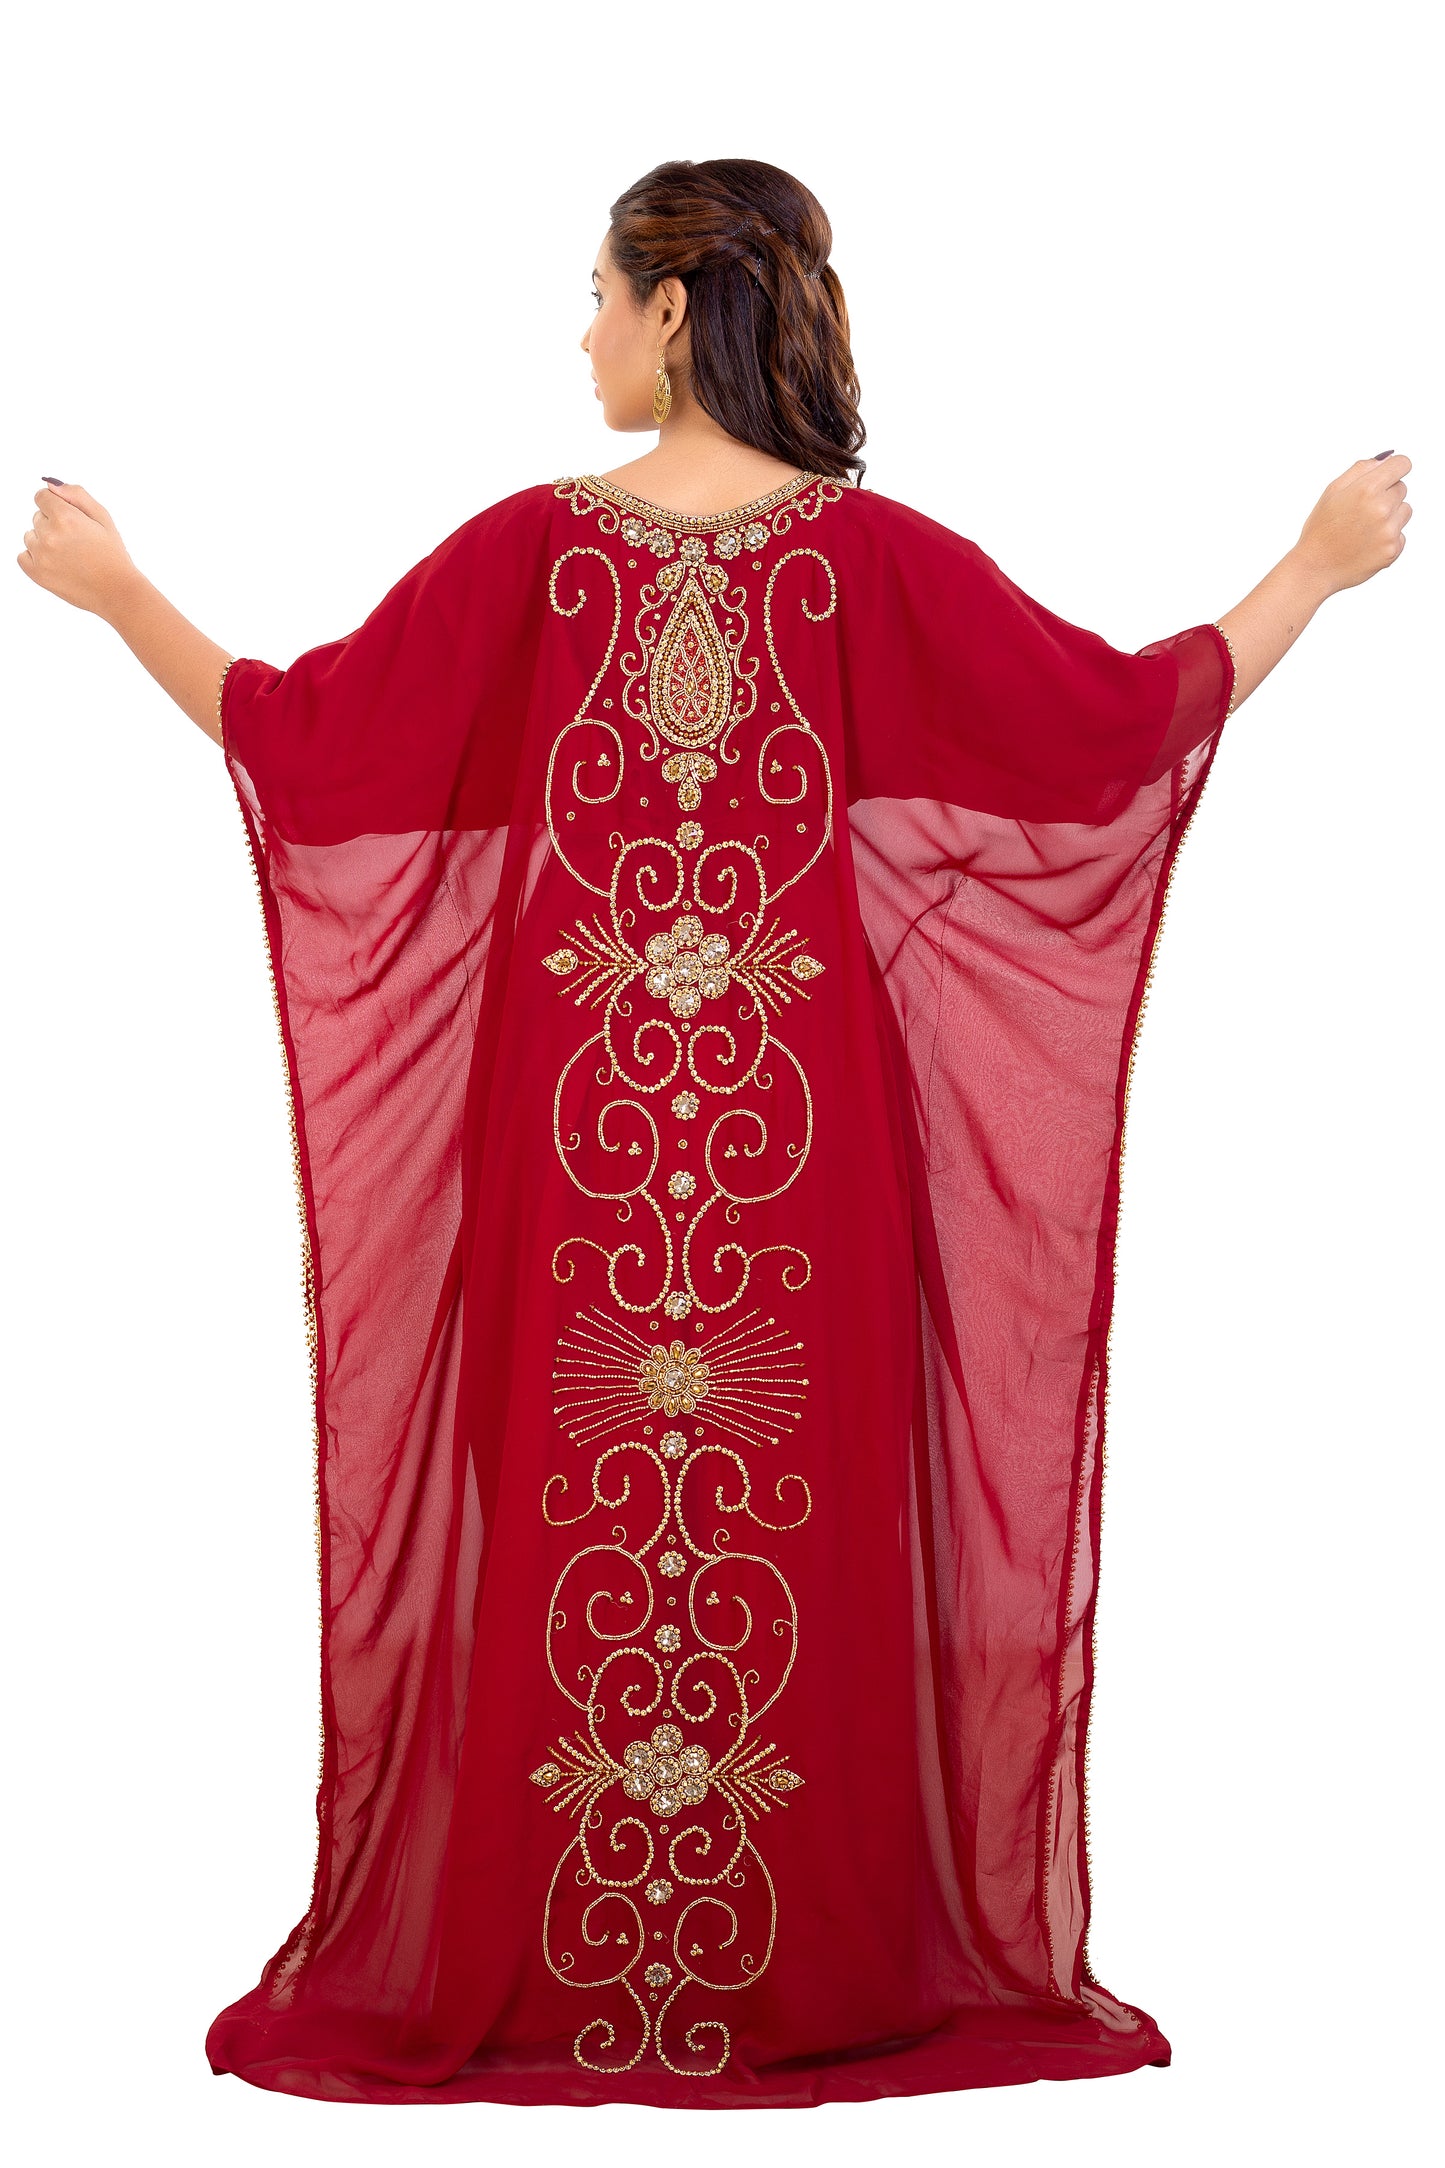 Dubai Kaftan With Intricately Embroidered Back Side of the Maxi - Maxim Creation